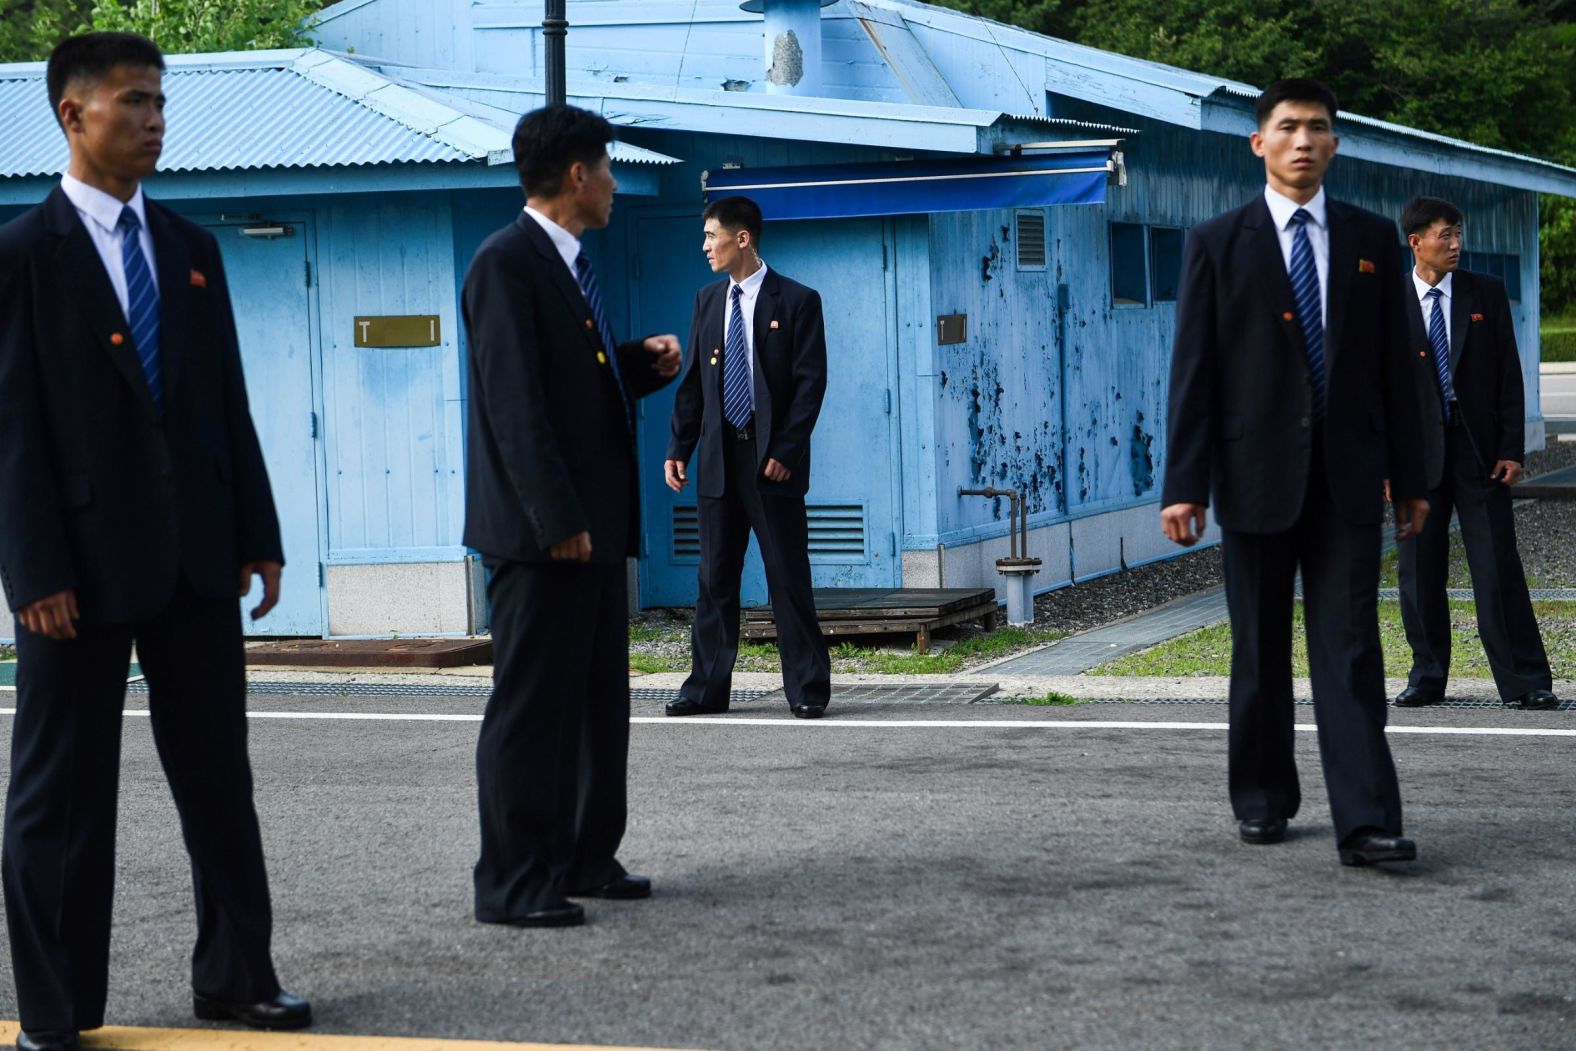 North Korean security agents keep watch south of the Military Demarcation Line that divides North and South Korea, as Trump and Kim meet in the Joint Security Area of Panmunjom in the Demilitarized zone on June 30.